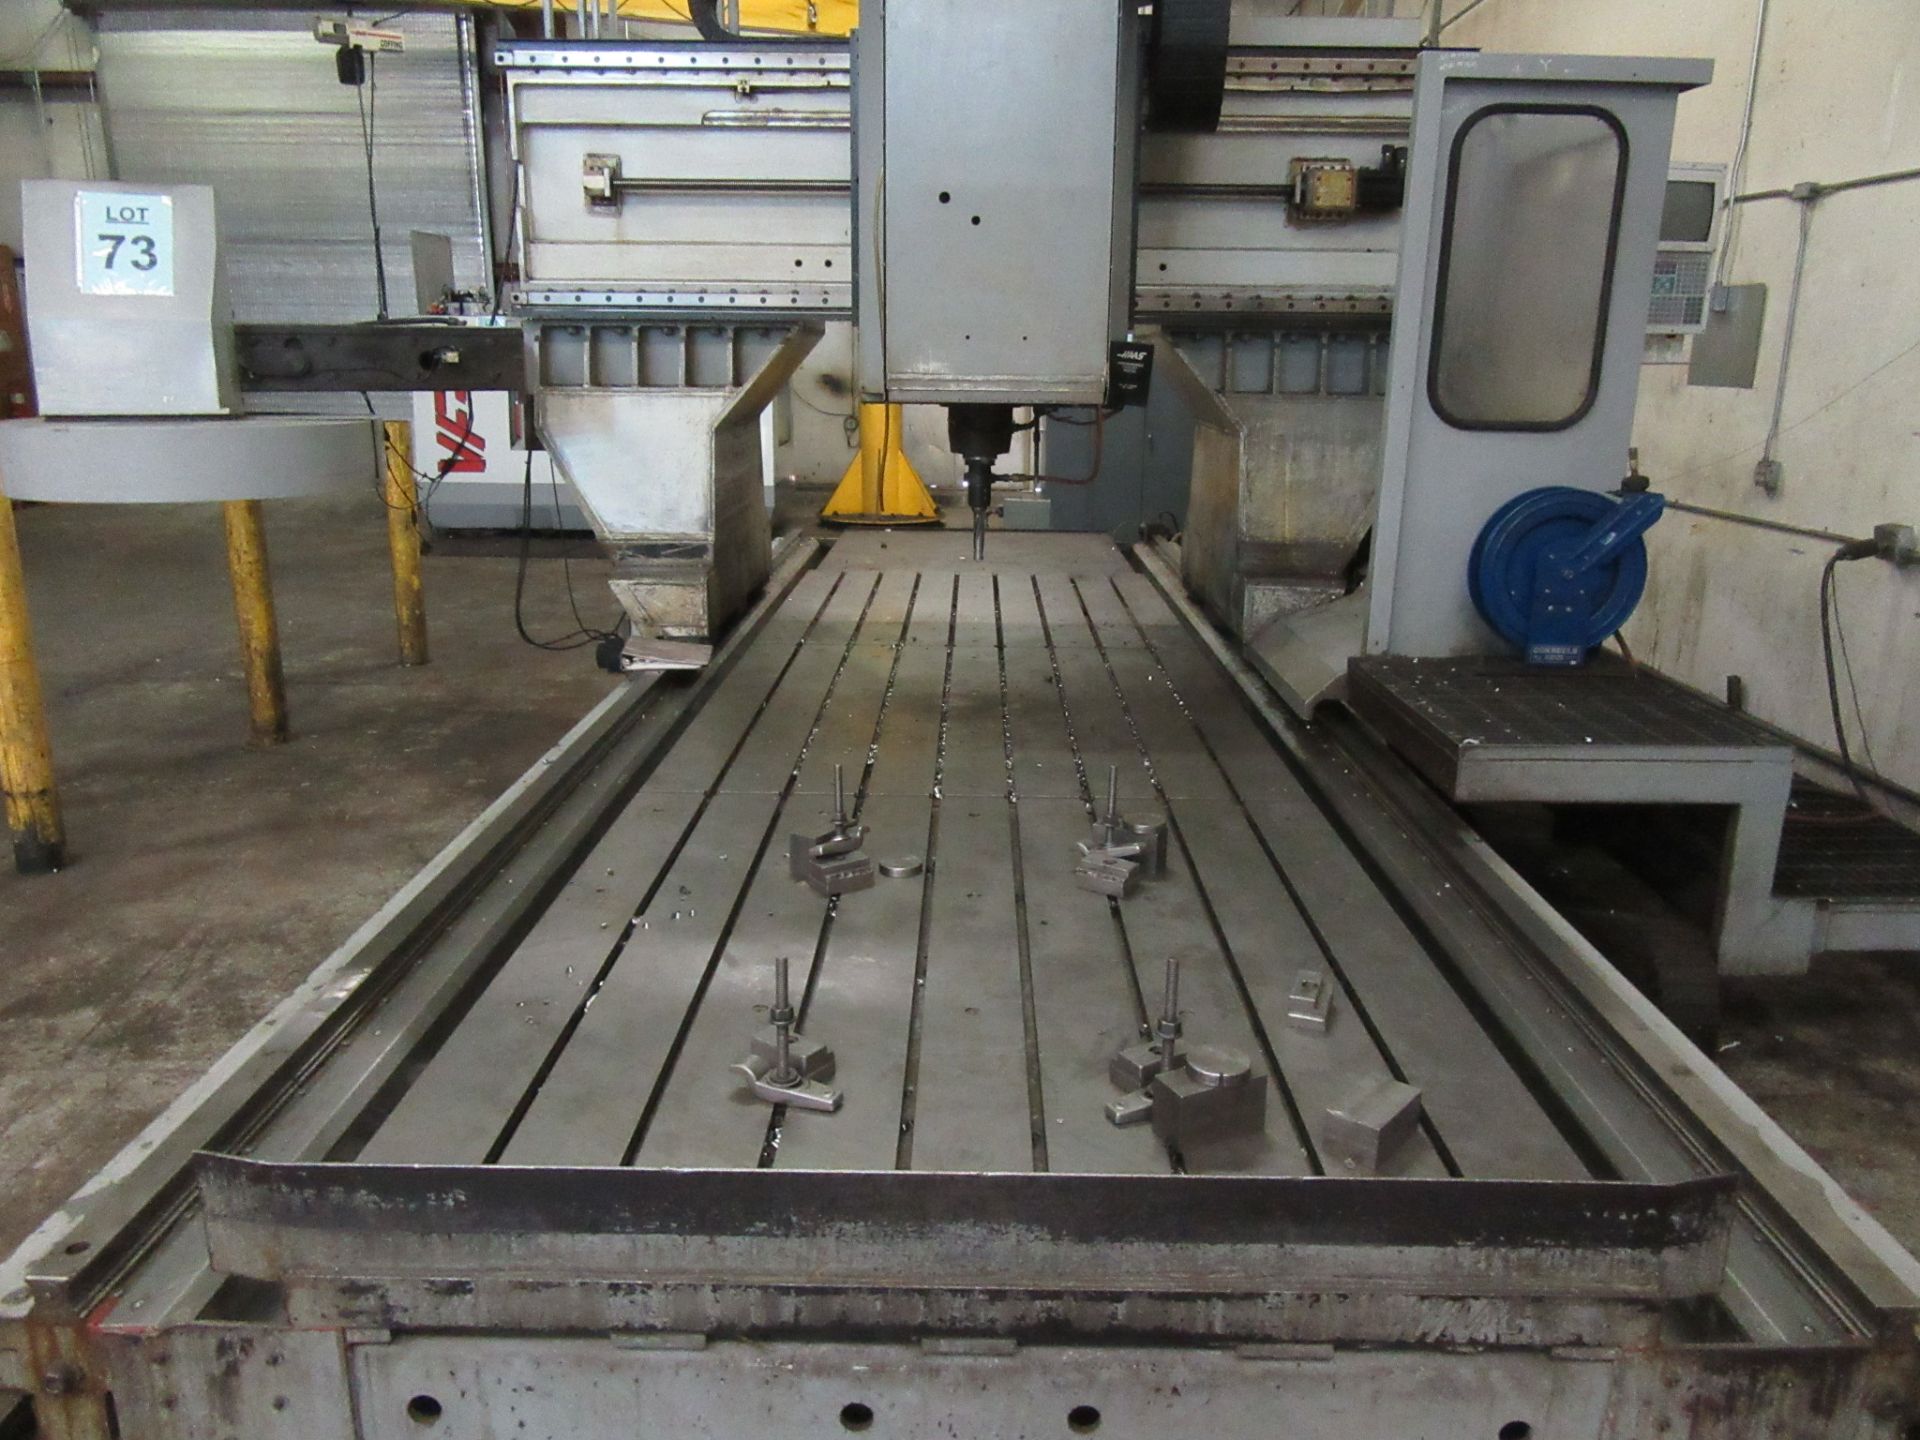 1998 HAAS G1 CNC GANTRY MILL, 58'' X 192'' TABLE, 20 ATC, S/N: 18975 - Image 2 of 7